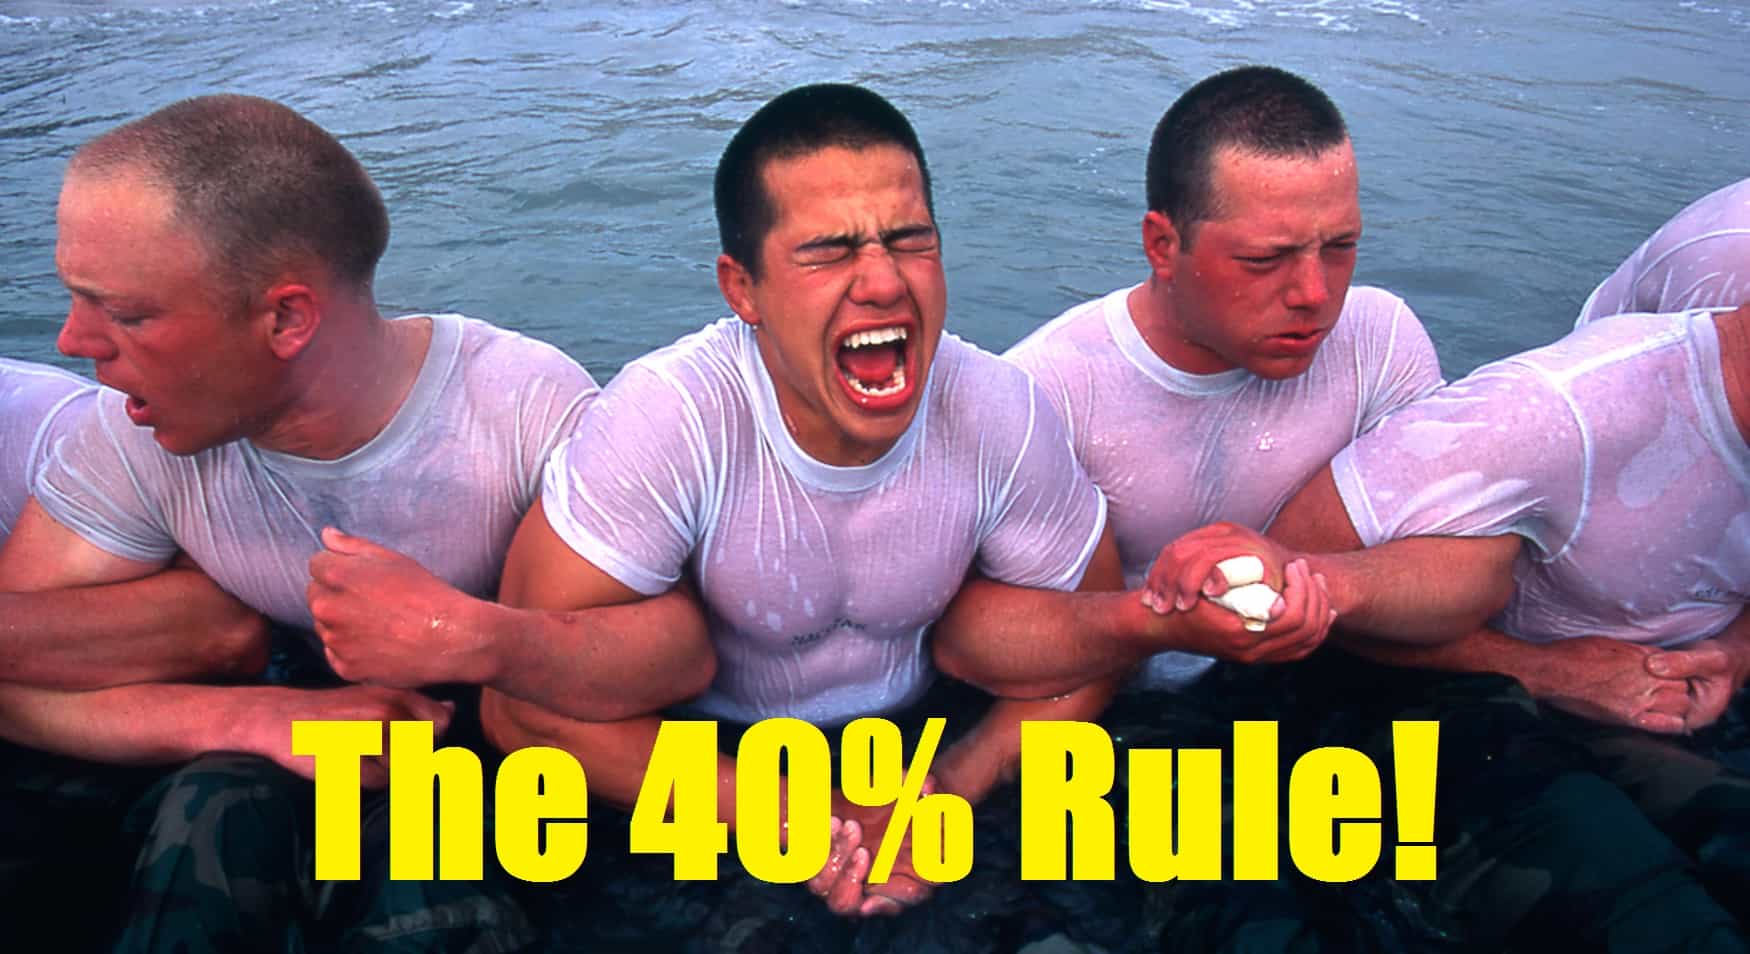 40% Rule and Key to Overcoming Mental Barriers